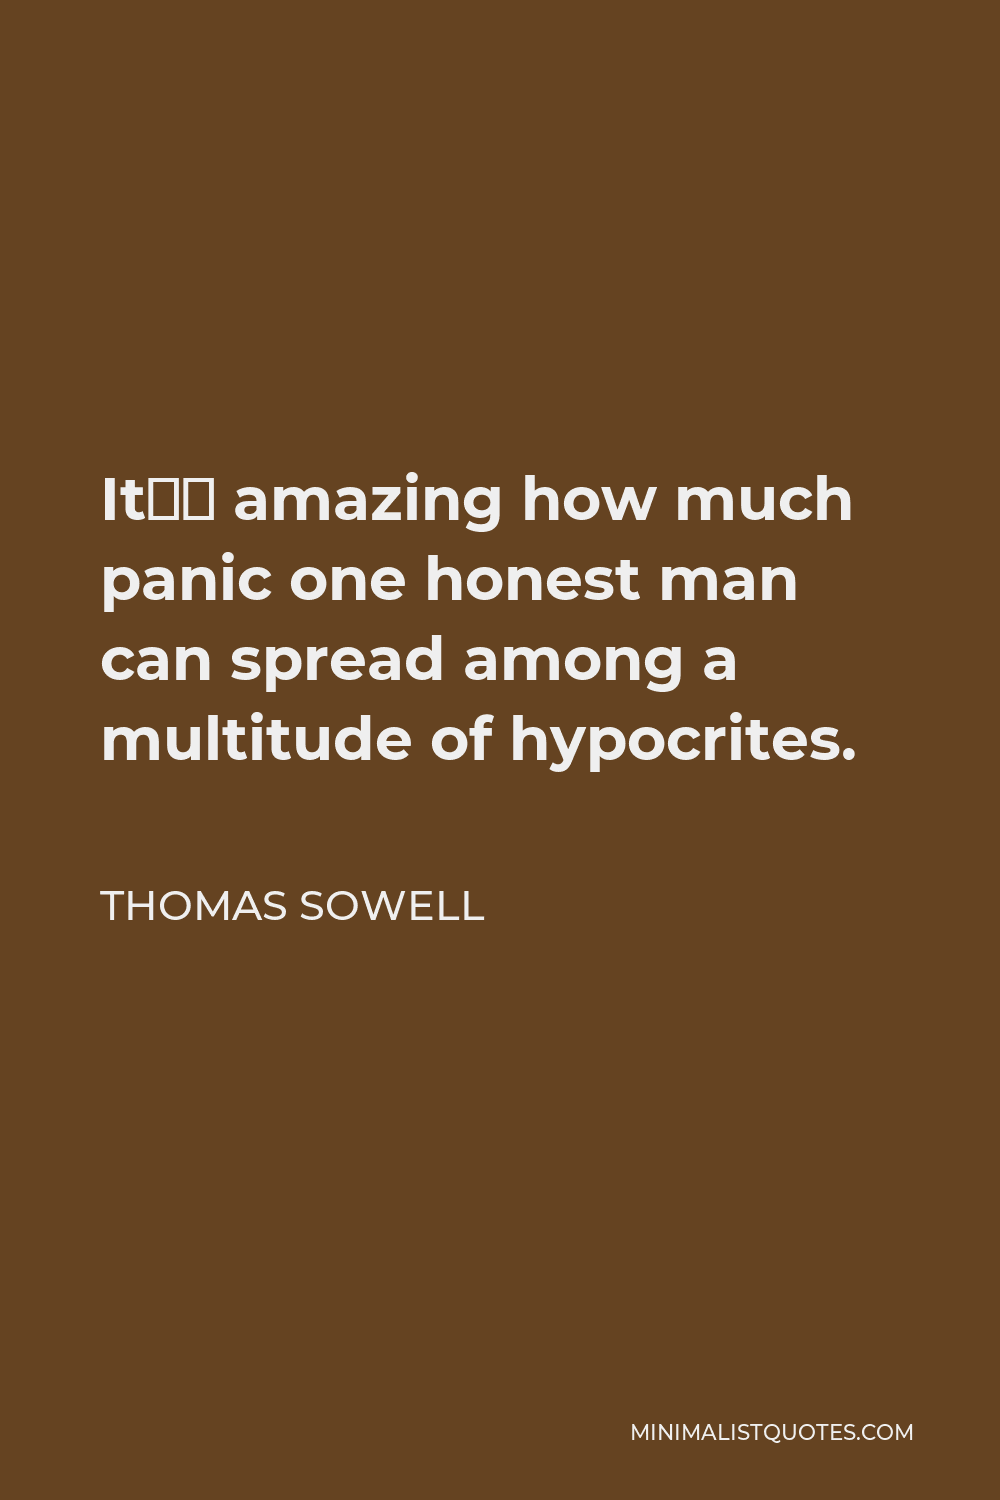 Thomas Sowell Quote - It’s amazing how much panic one honest man can spread among a multitude of hypocrites.